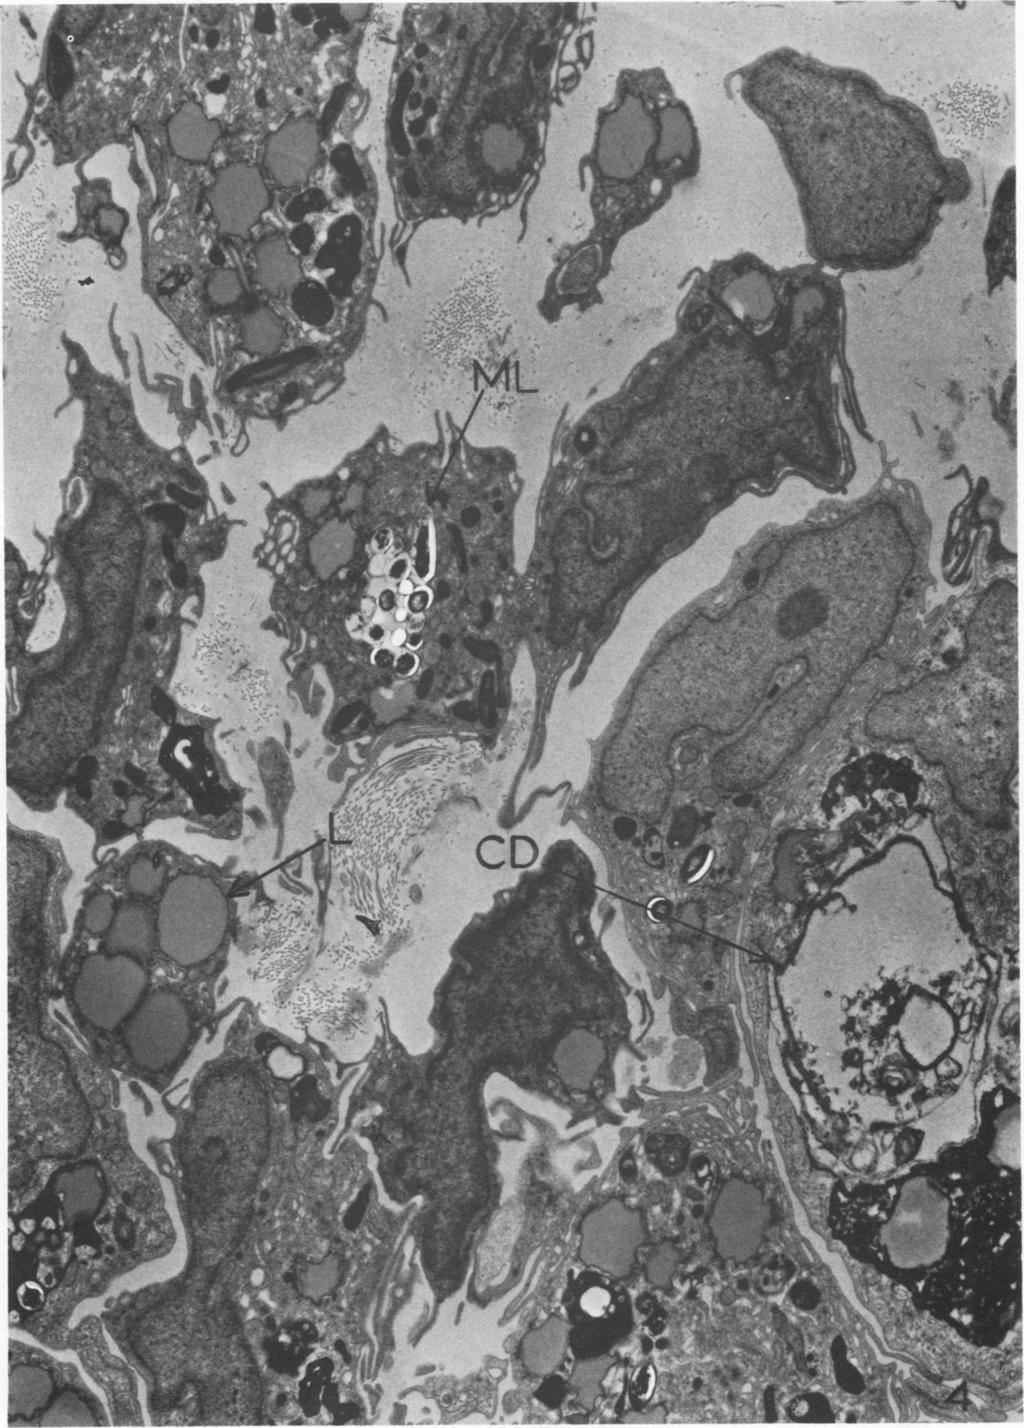 VOL.7, 1973 RESPONSE OF FOOT PAD TO M. LEPRAE 81 a- V.1, F.1 / I 'U i.,3 /.<.rs *\s W tb' ^^ FIG. 4. Electron micrograph of a cellular infiltrate showing cells containing phagocytized M.